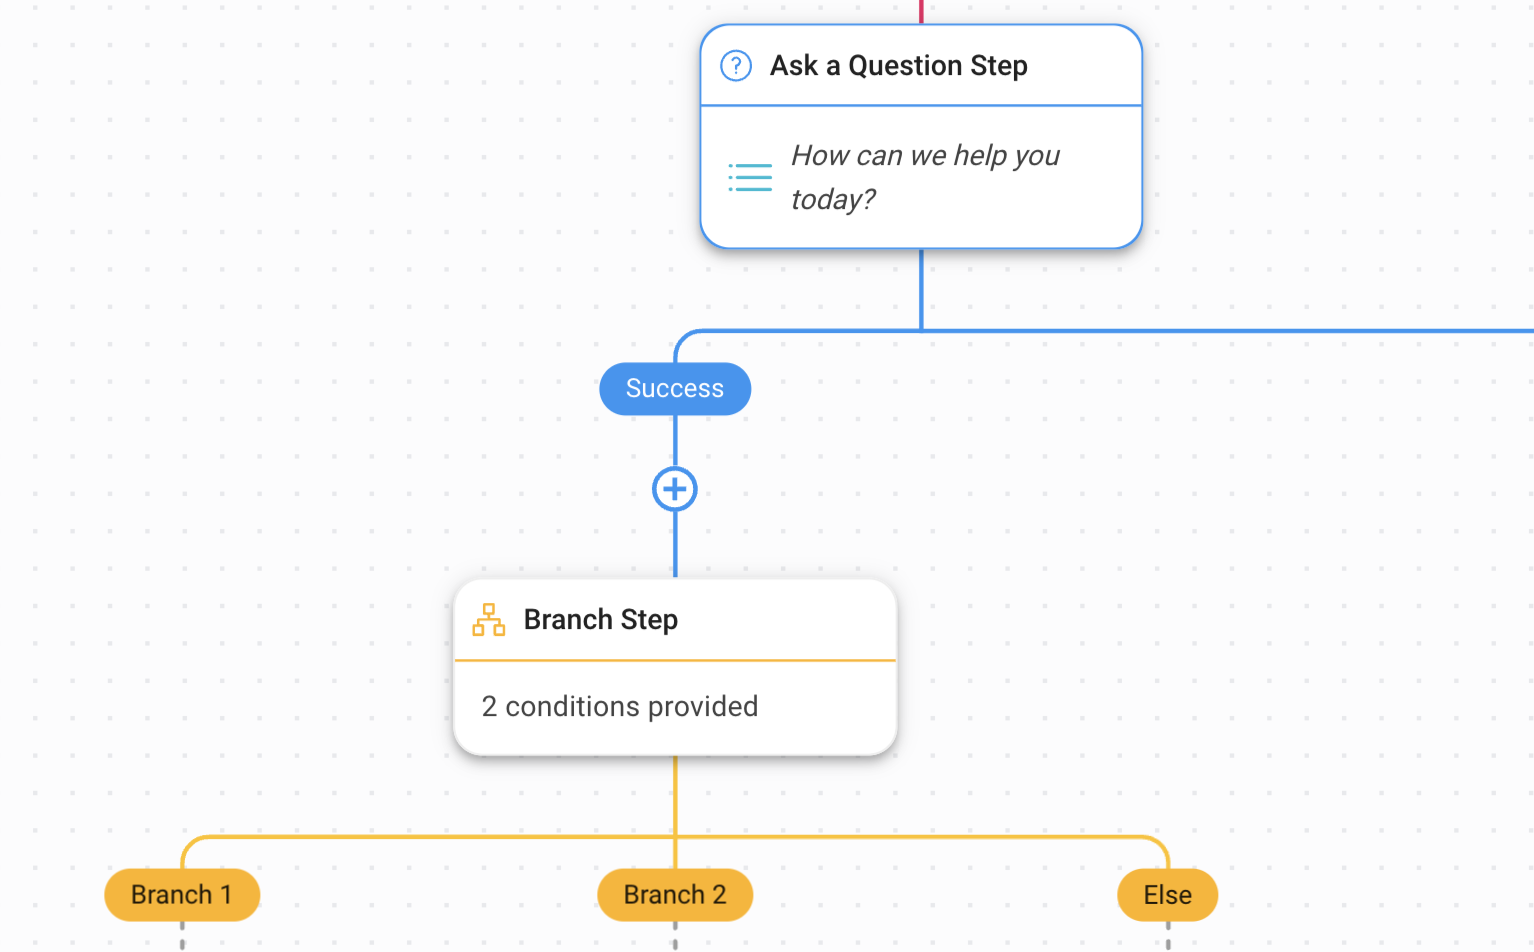 set up a Workflow to route customers based on their needs